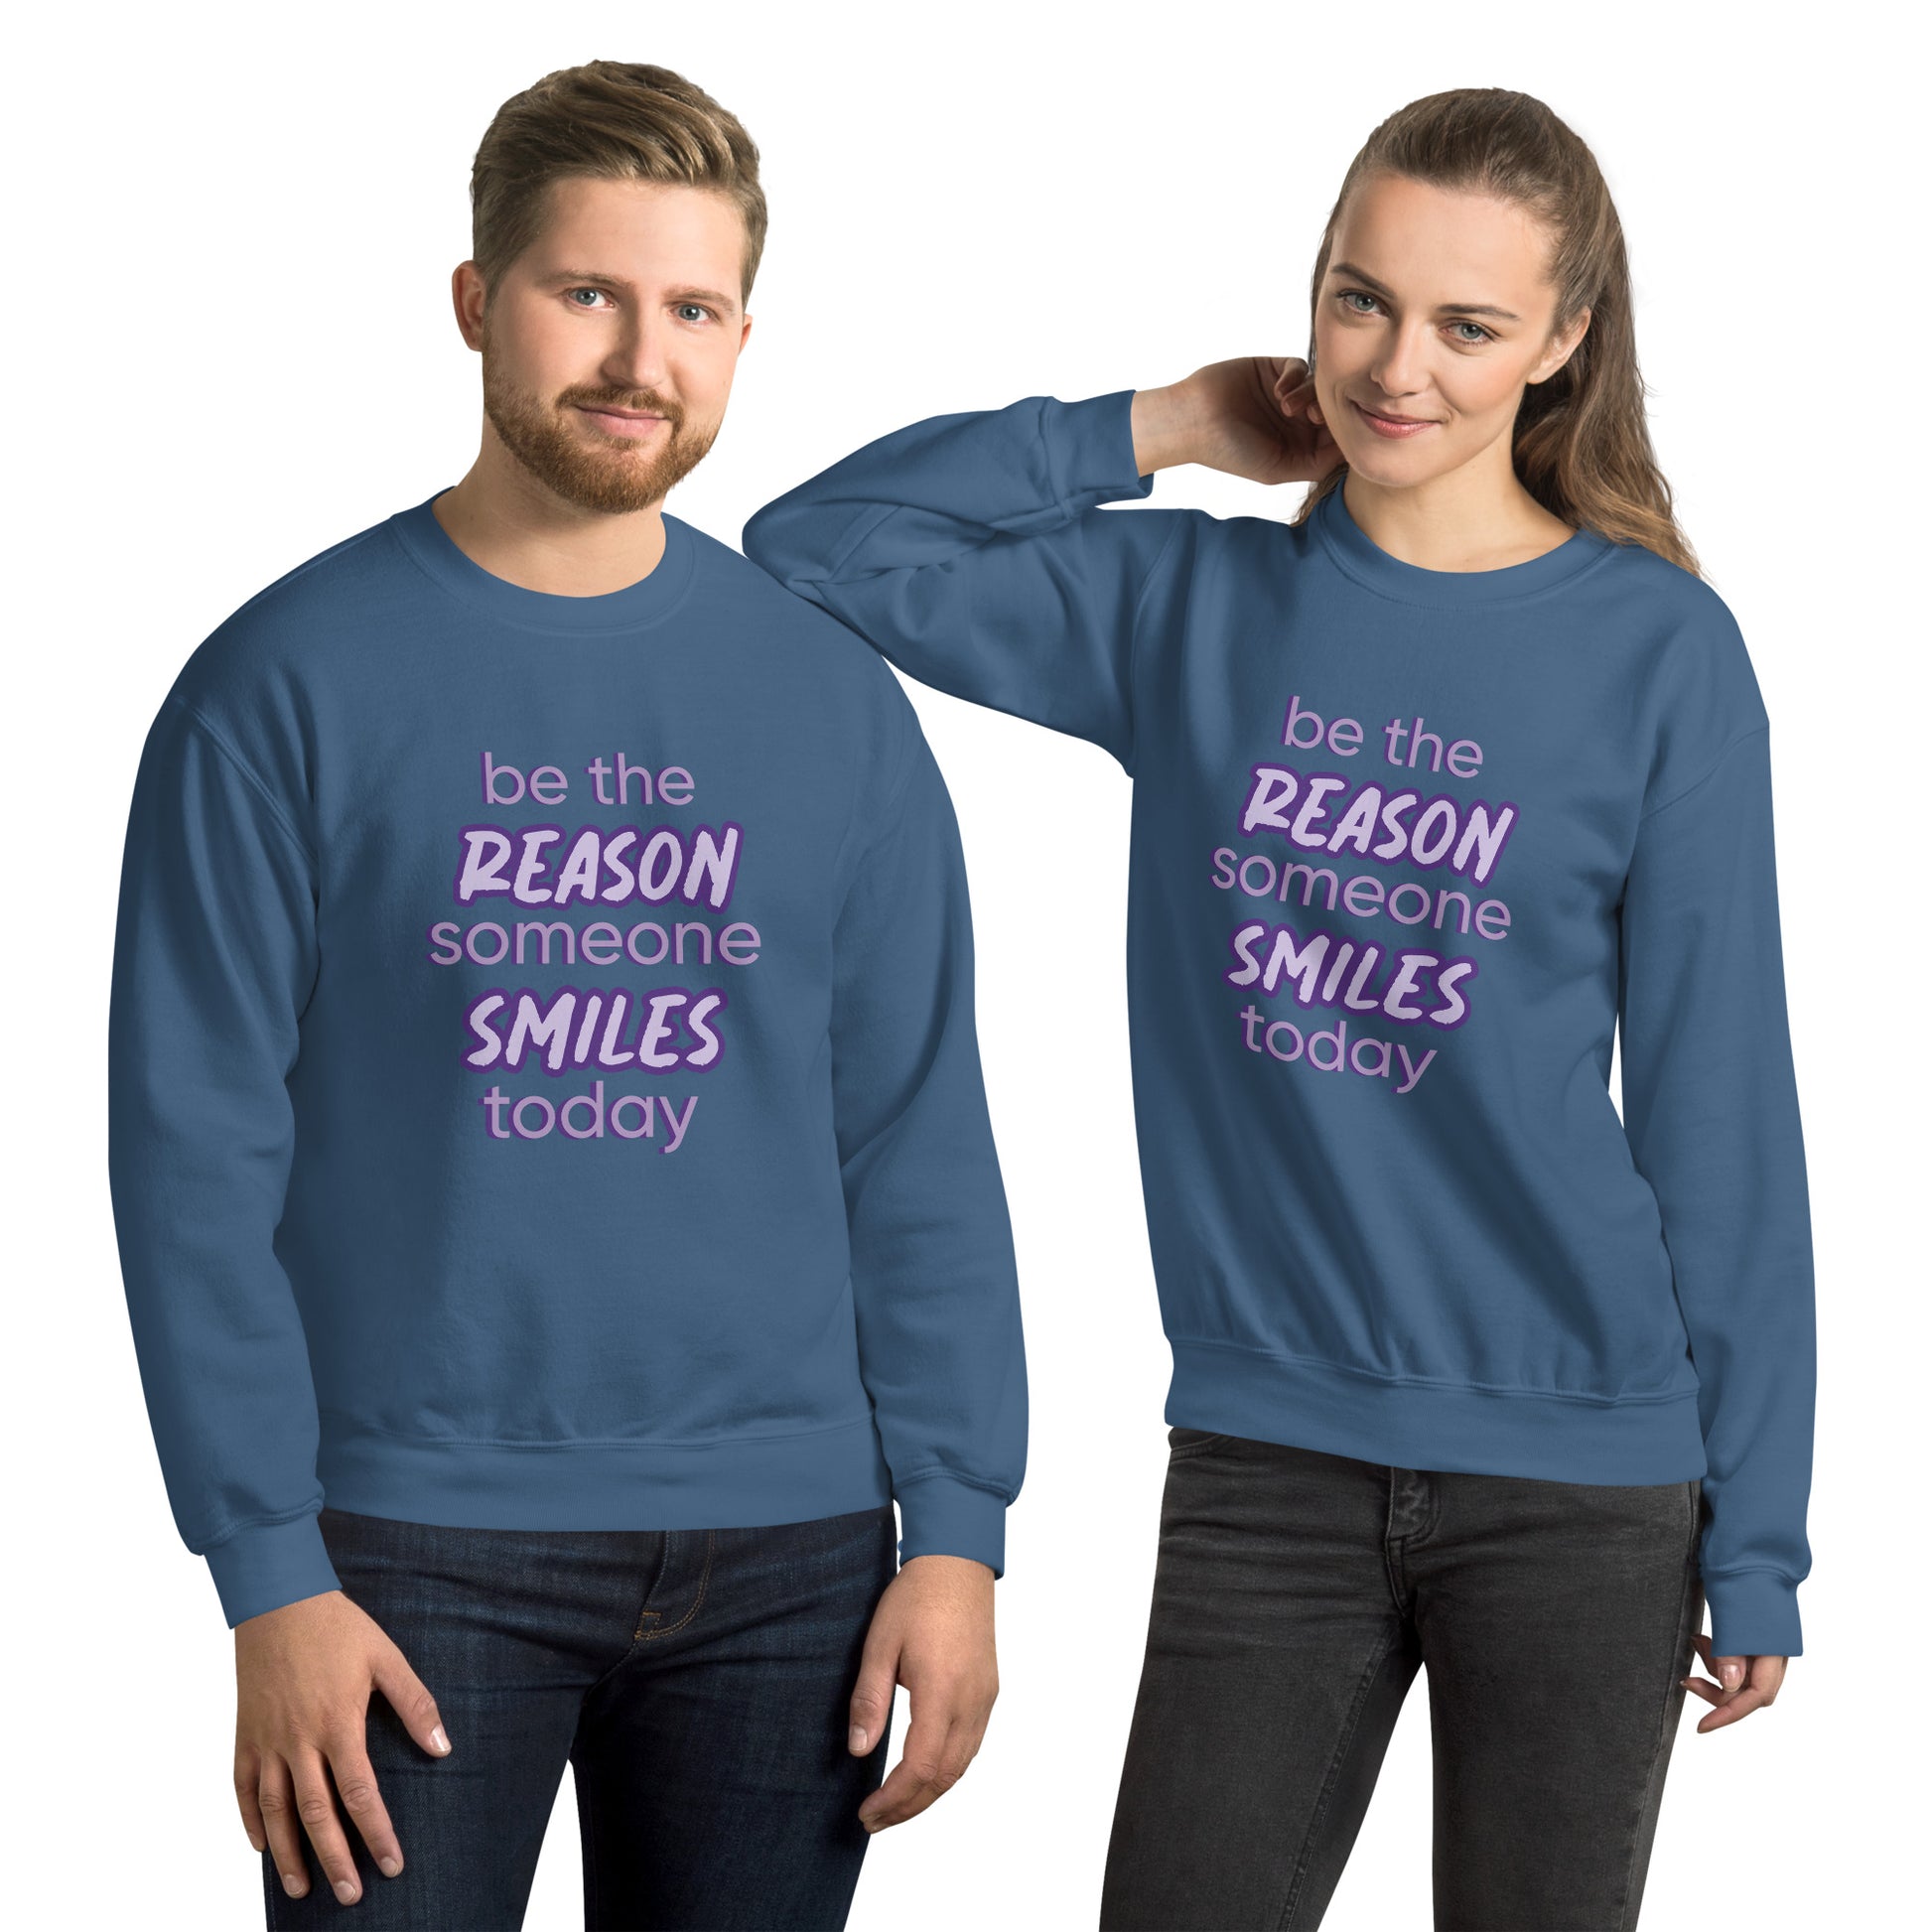 Men and women with indigo blue sweater and the quote "be the reason someone smiles today" in purple on it. 